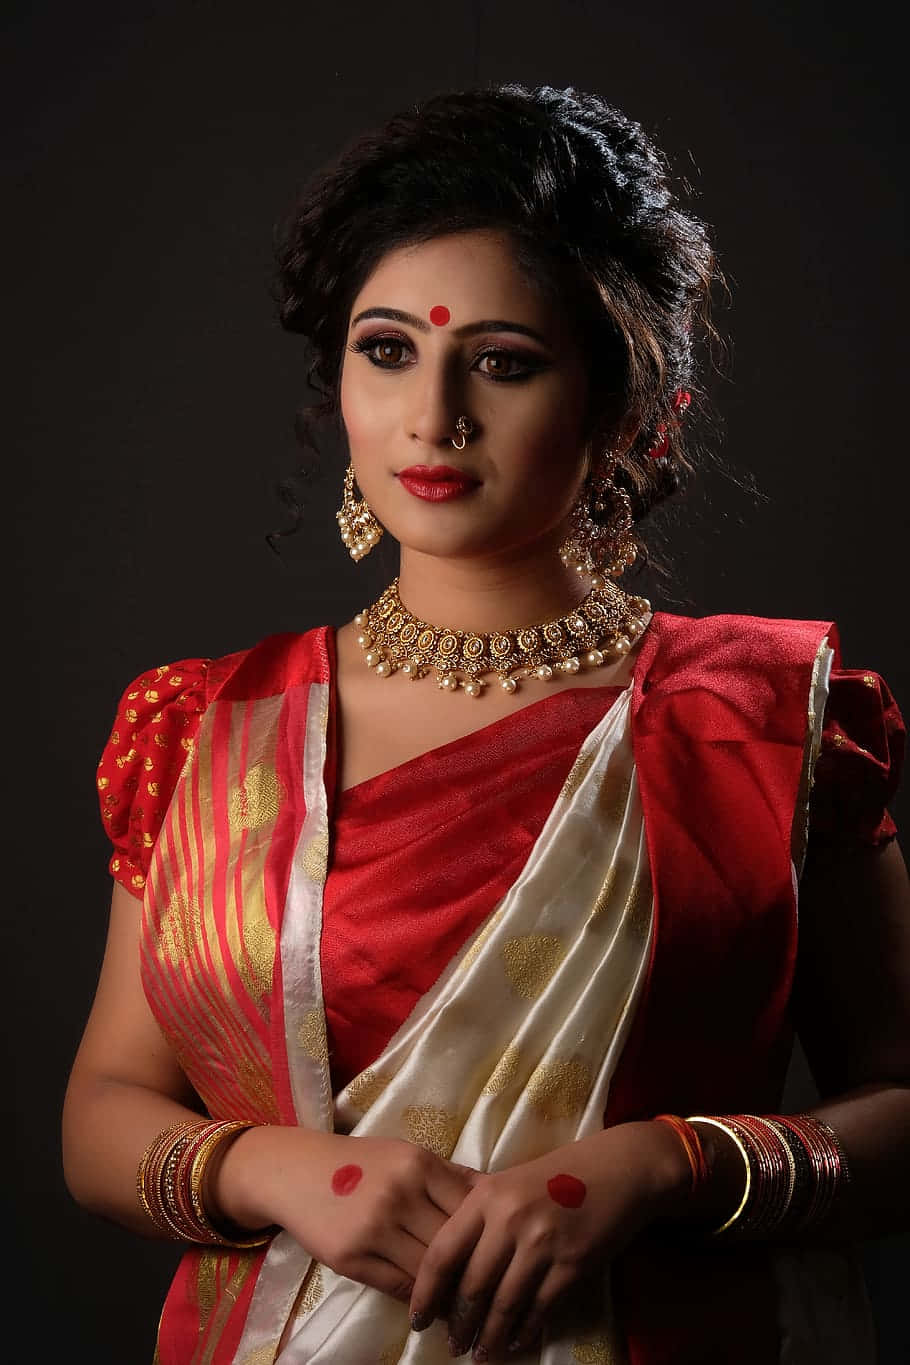 Captivating Indian Beauty In Red